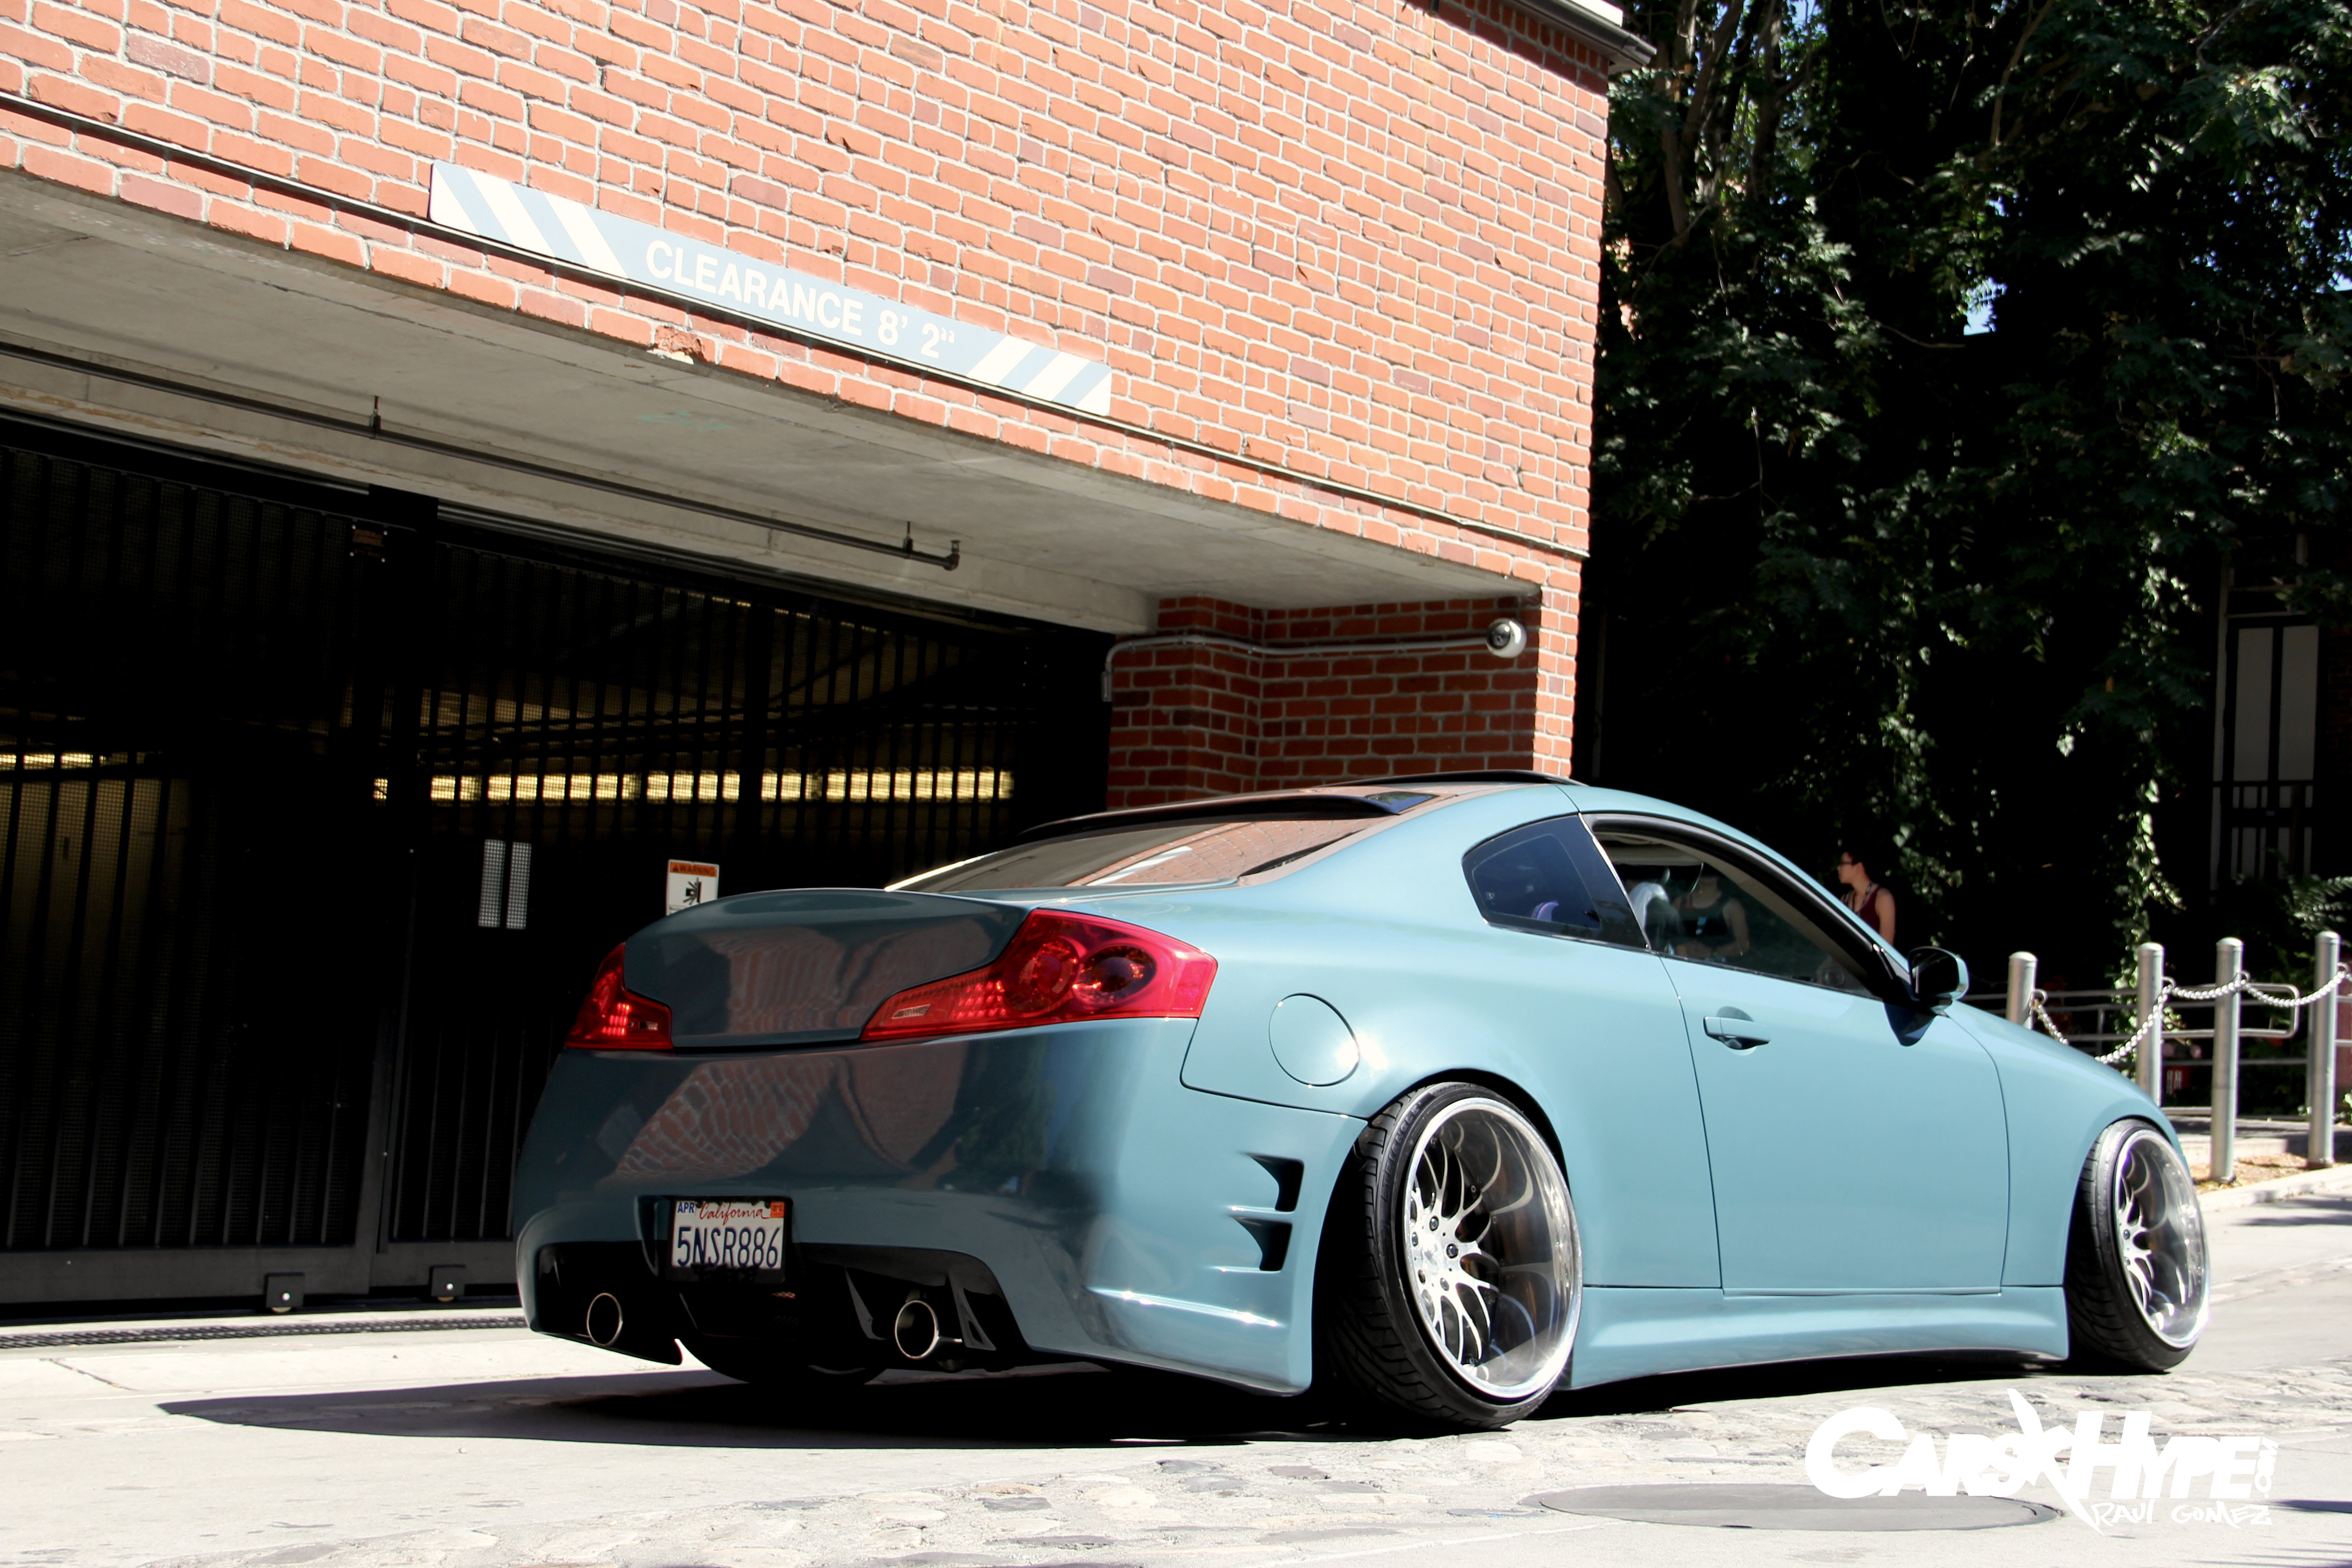 Matthew’s Stanced Out G35.